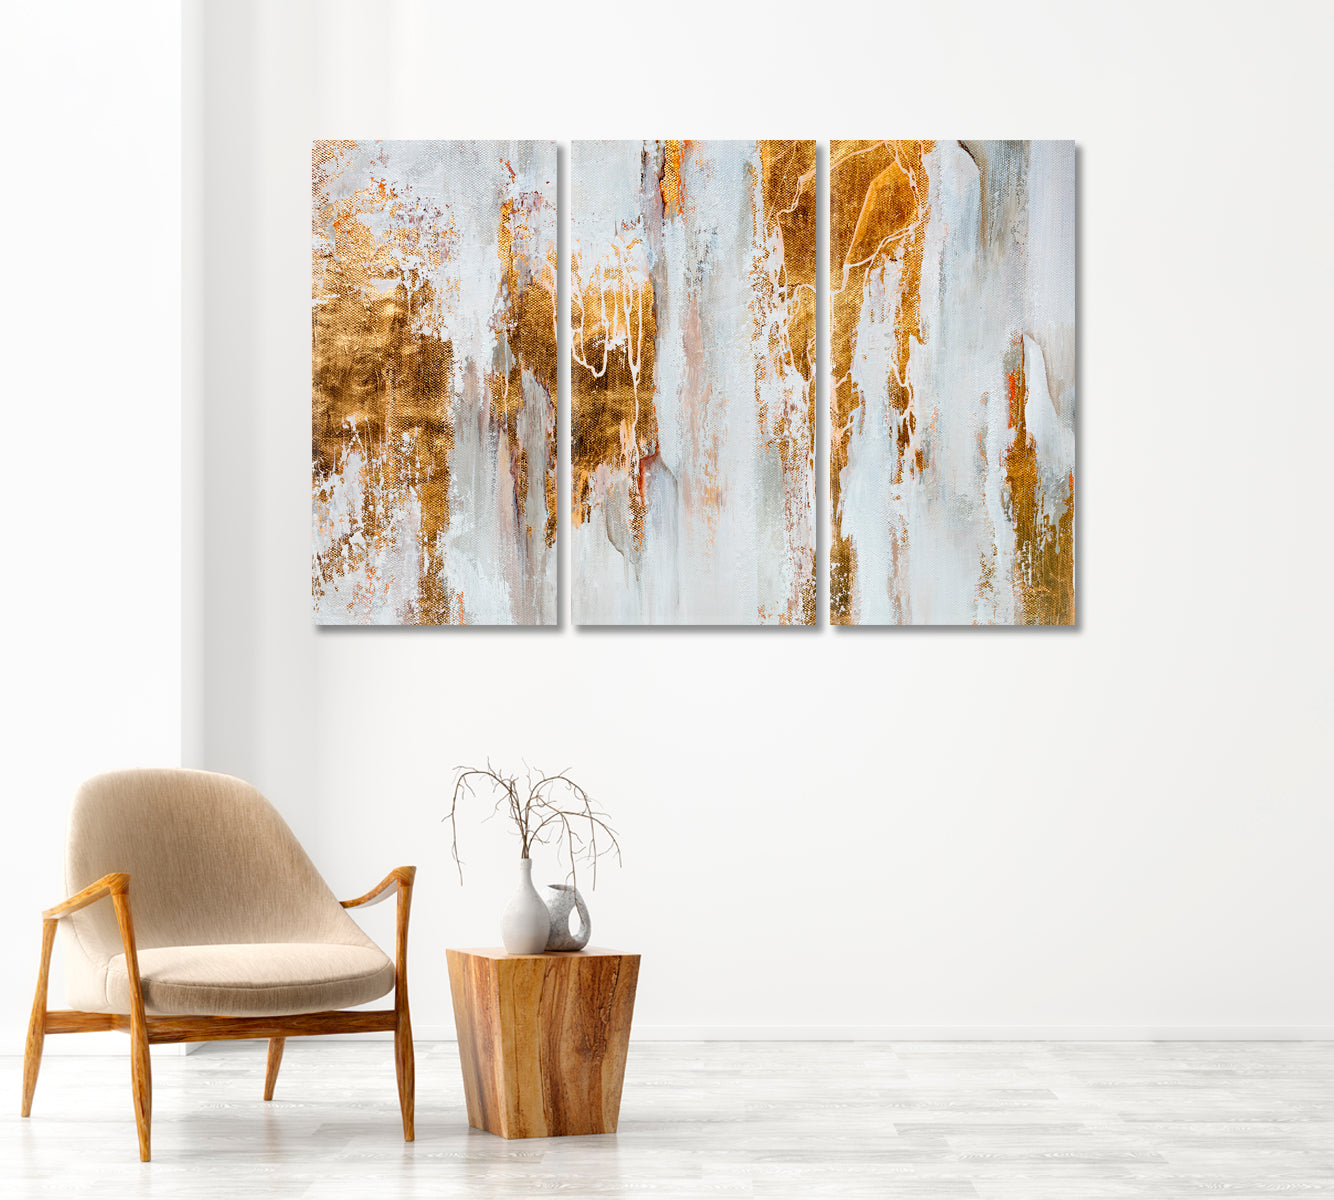 Luxury Abstract Flowing Paint Oriental Style Canvas Print-Canvas Print-CetArt-1 Panel-24x16 inches-CetArt